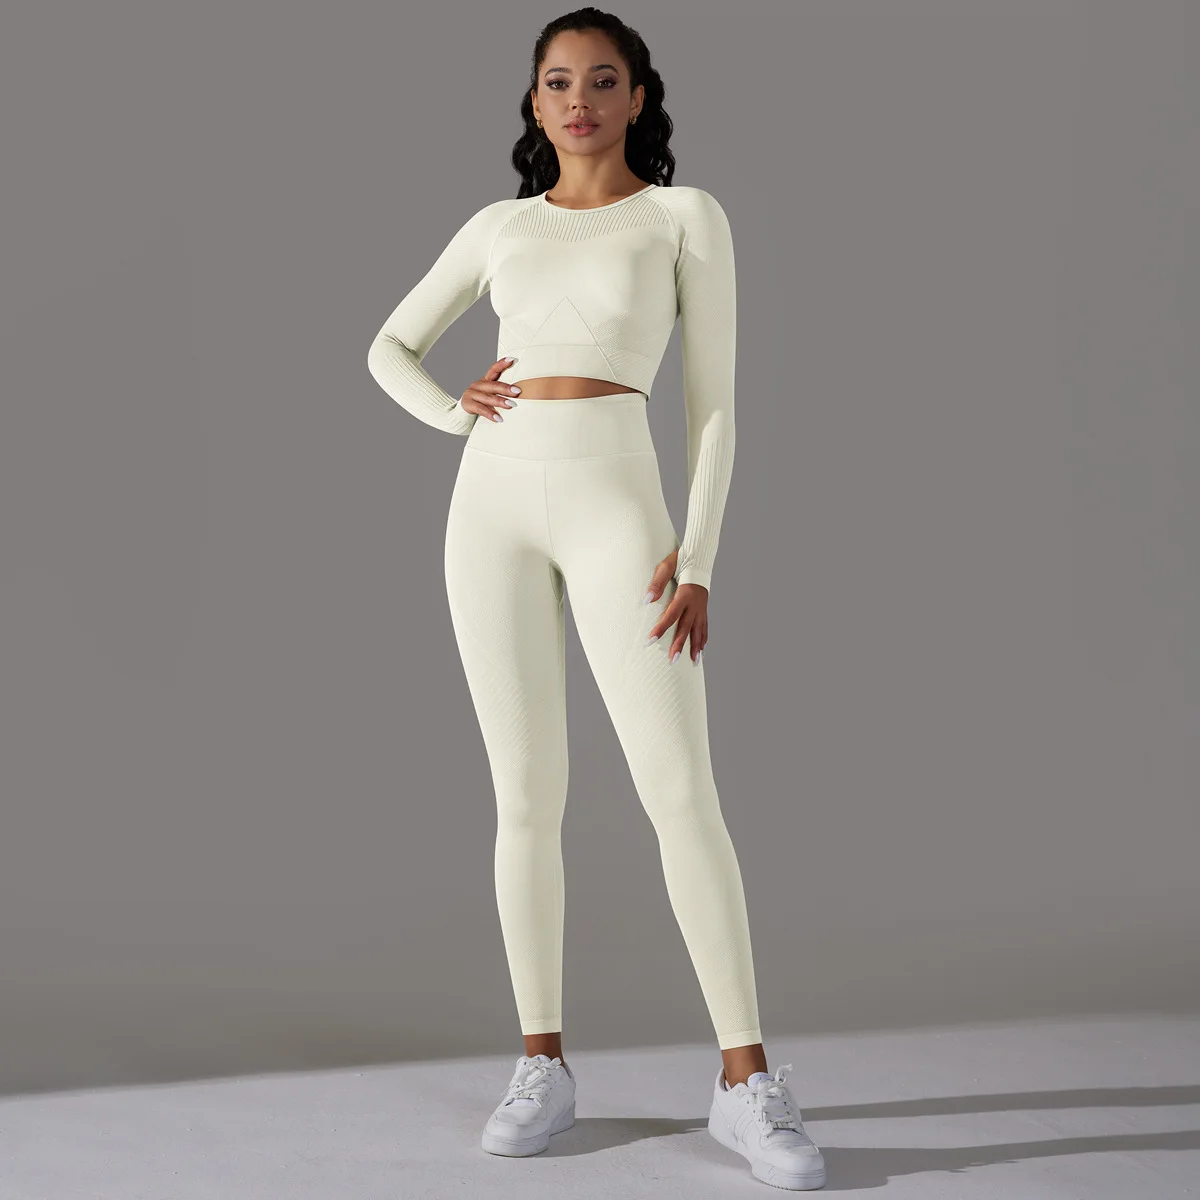 Women's High Quality Active Wear Gym Clothing Long Sleeve Crop Tops Leggings Clothes Yoga Set